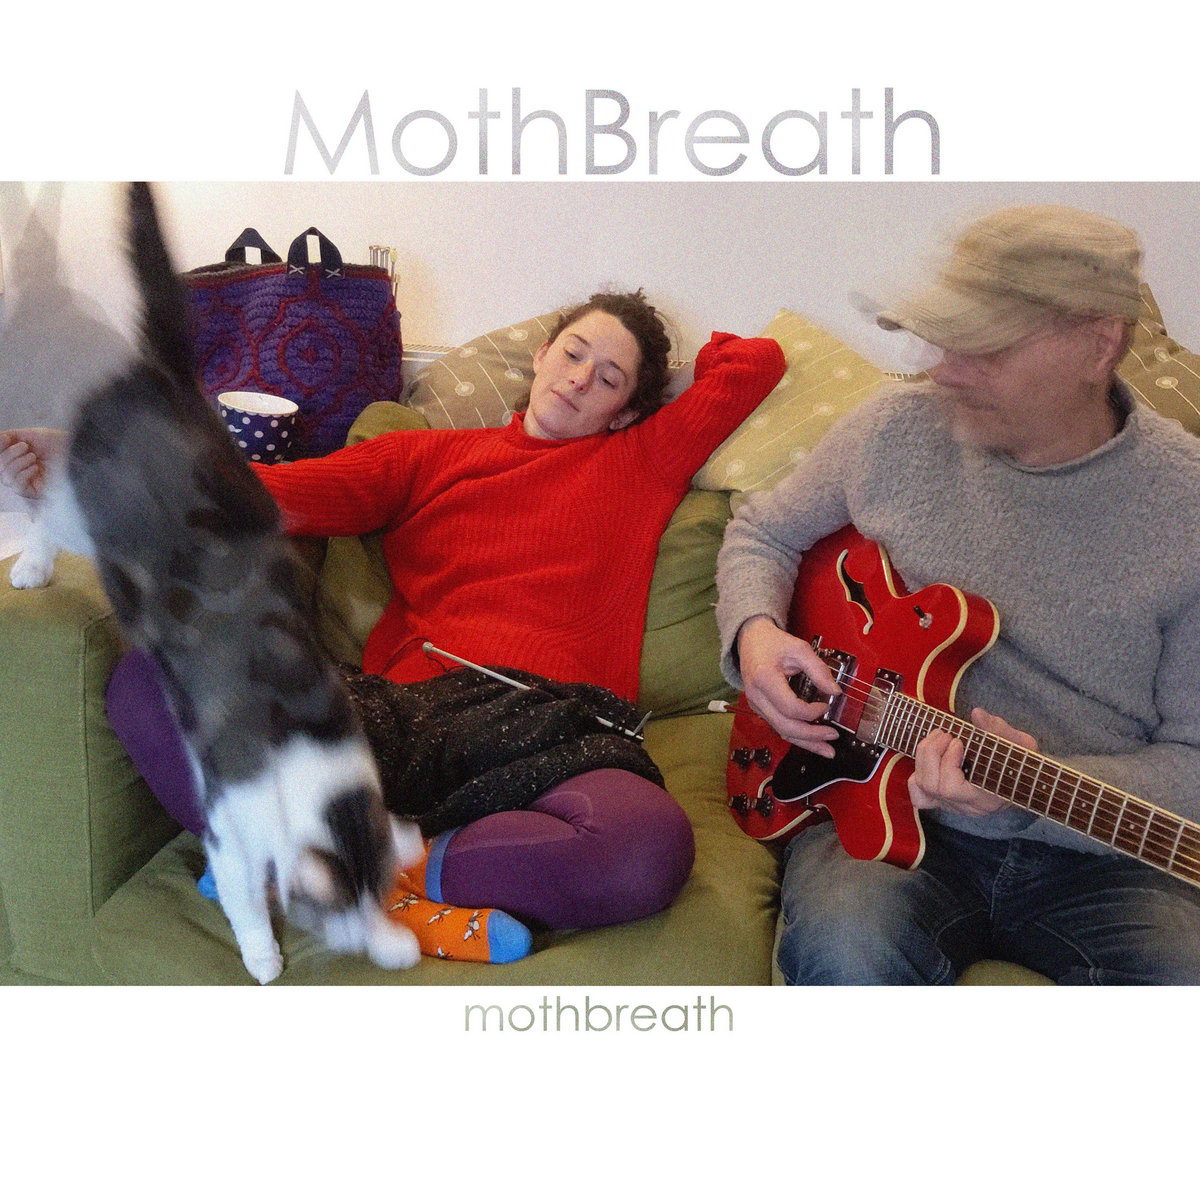 Listen to the album 'mothbreath' and rate MothBreath stunning debut.
#indiedockmusicblog #dreampop

indiedockmusicblog.co.uk/?p=23975&fbcli…